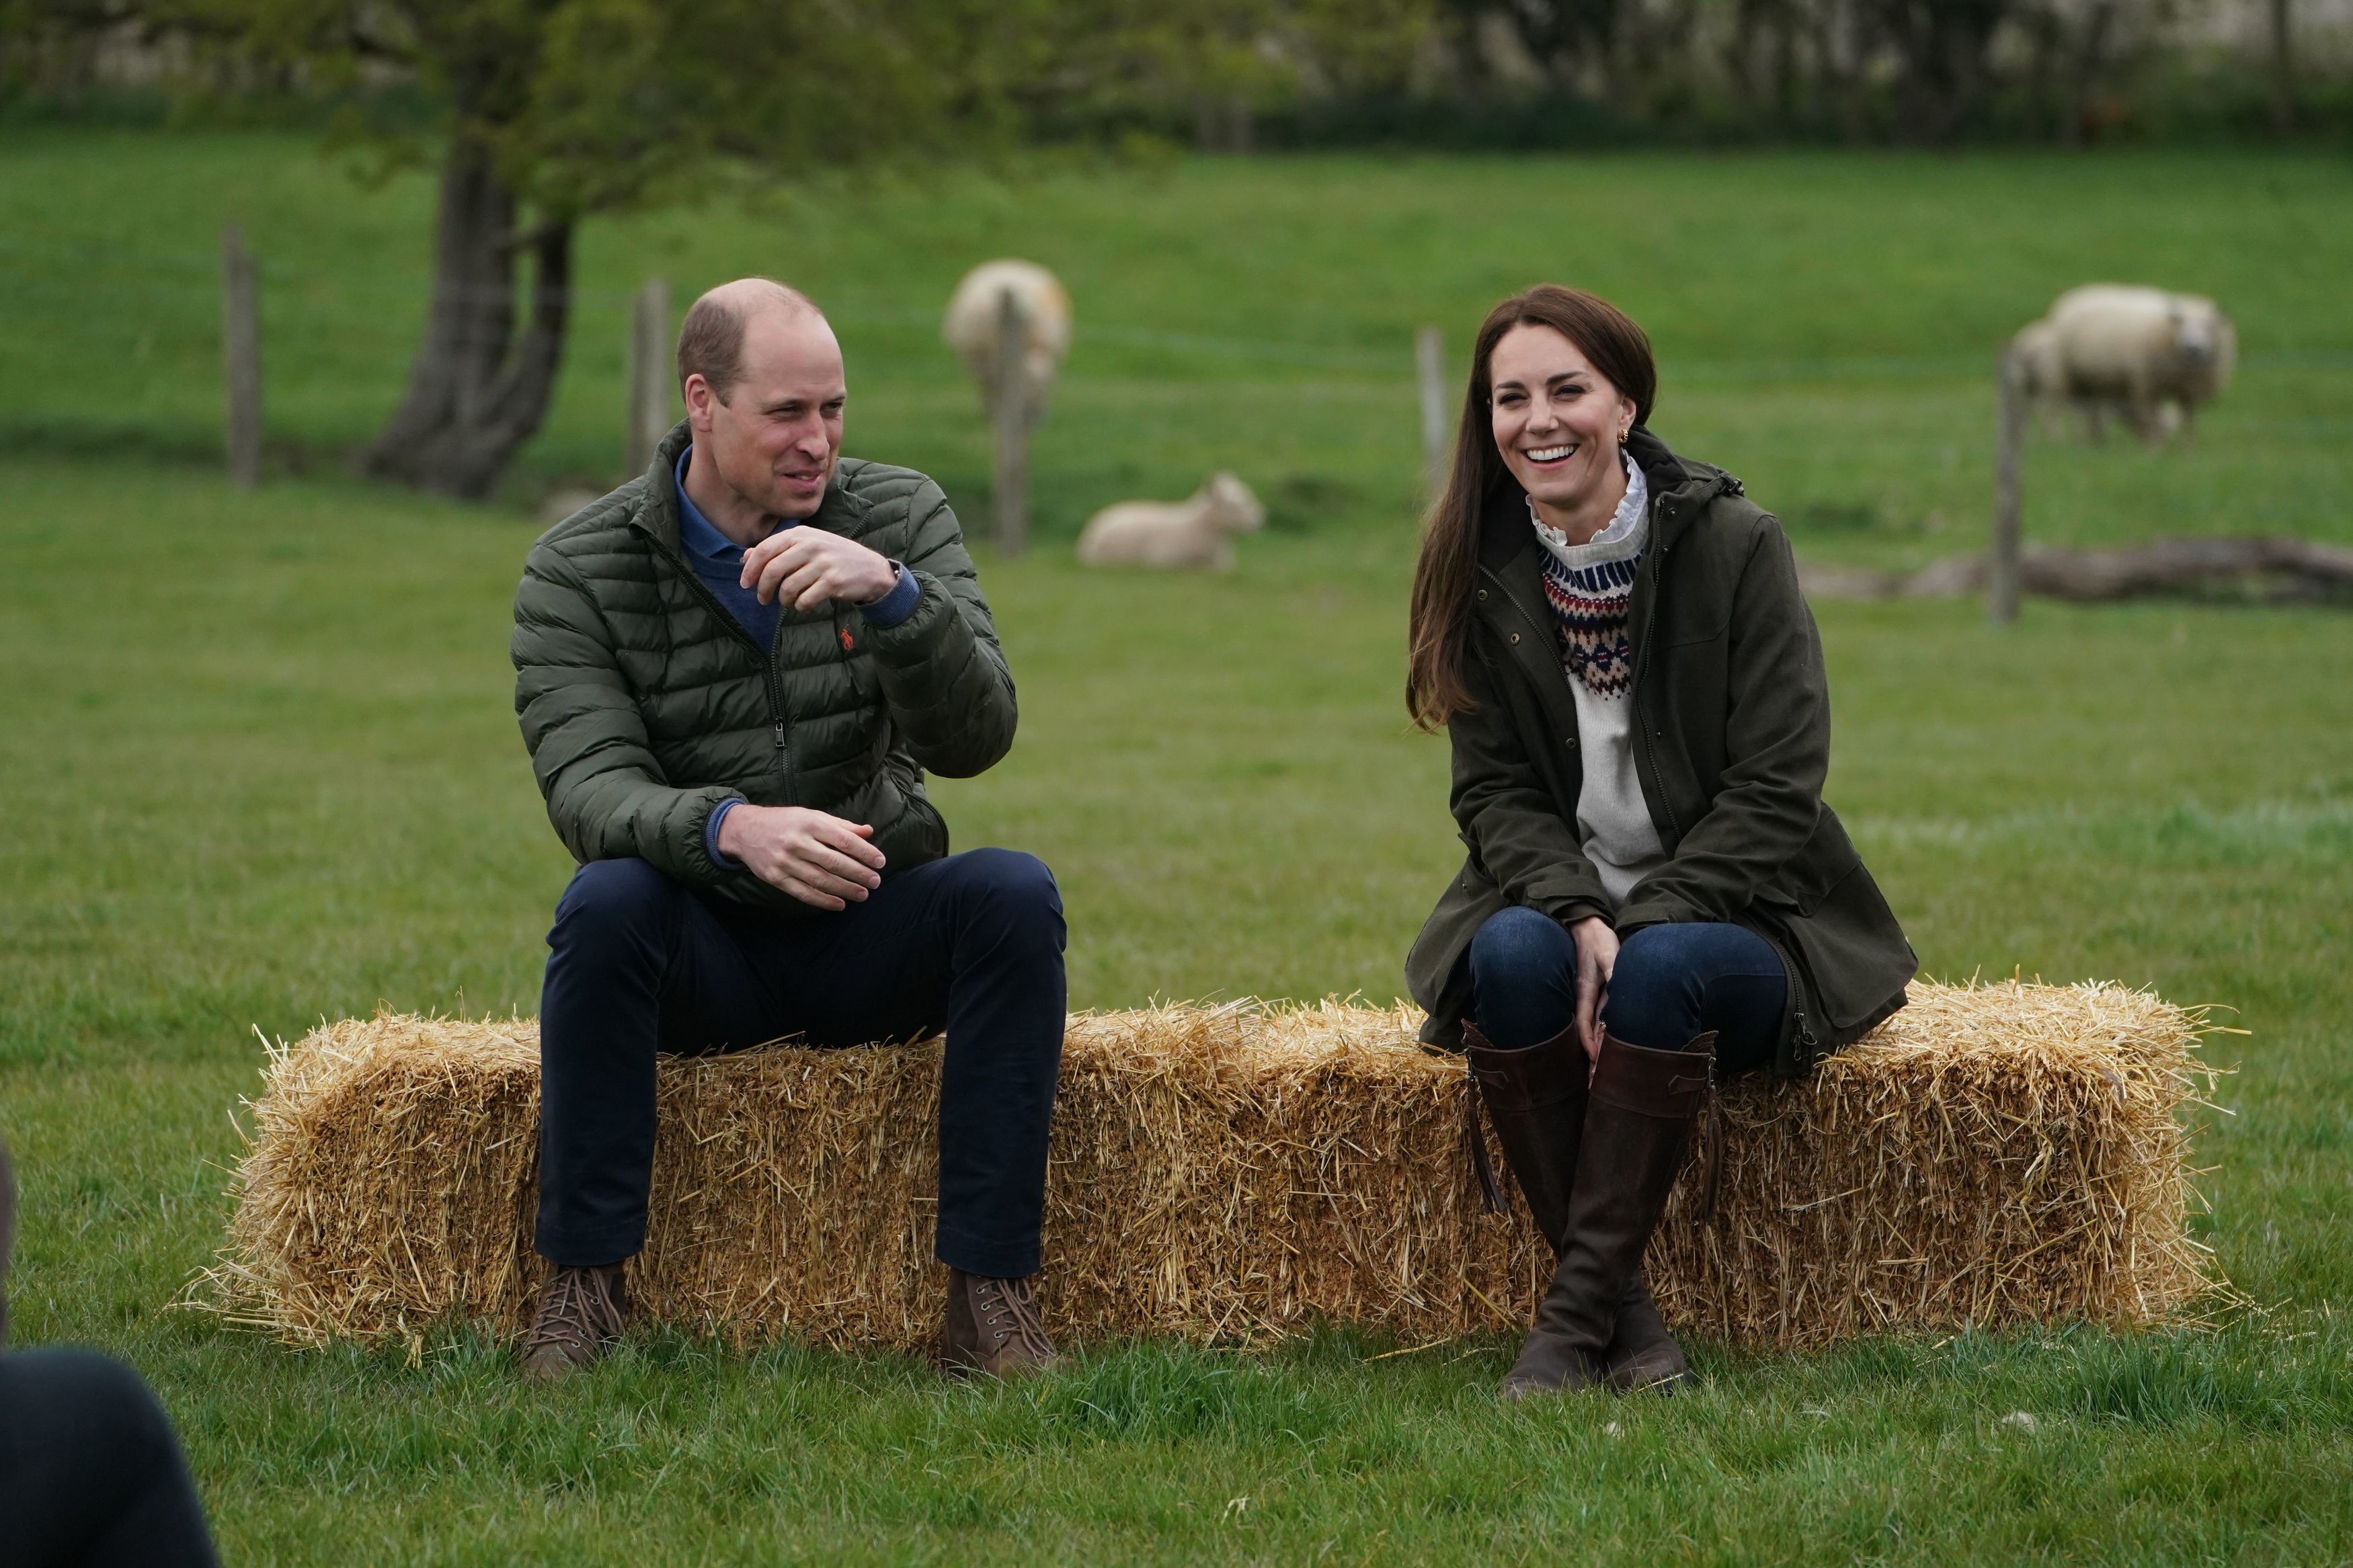 Prince William and his wife Kate Middleton pictured while sitting on hay balls during a royal visit to Manor Farm in Little Stainton, Durham on April 27, 2021 in Darlington, England. / Source: Getty Images